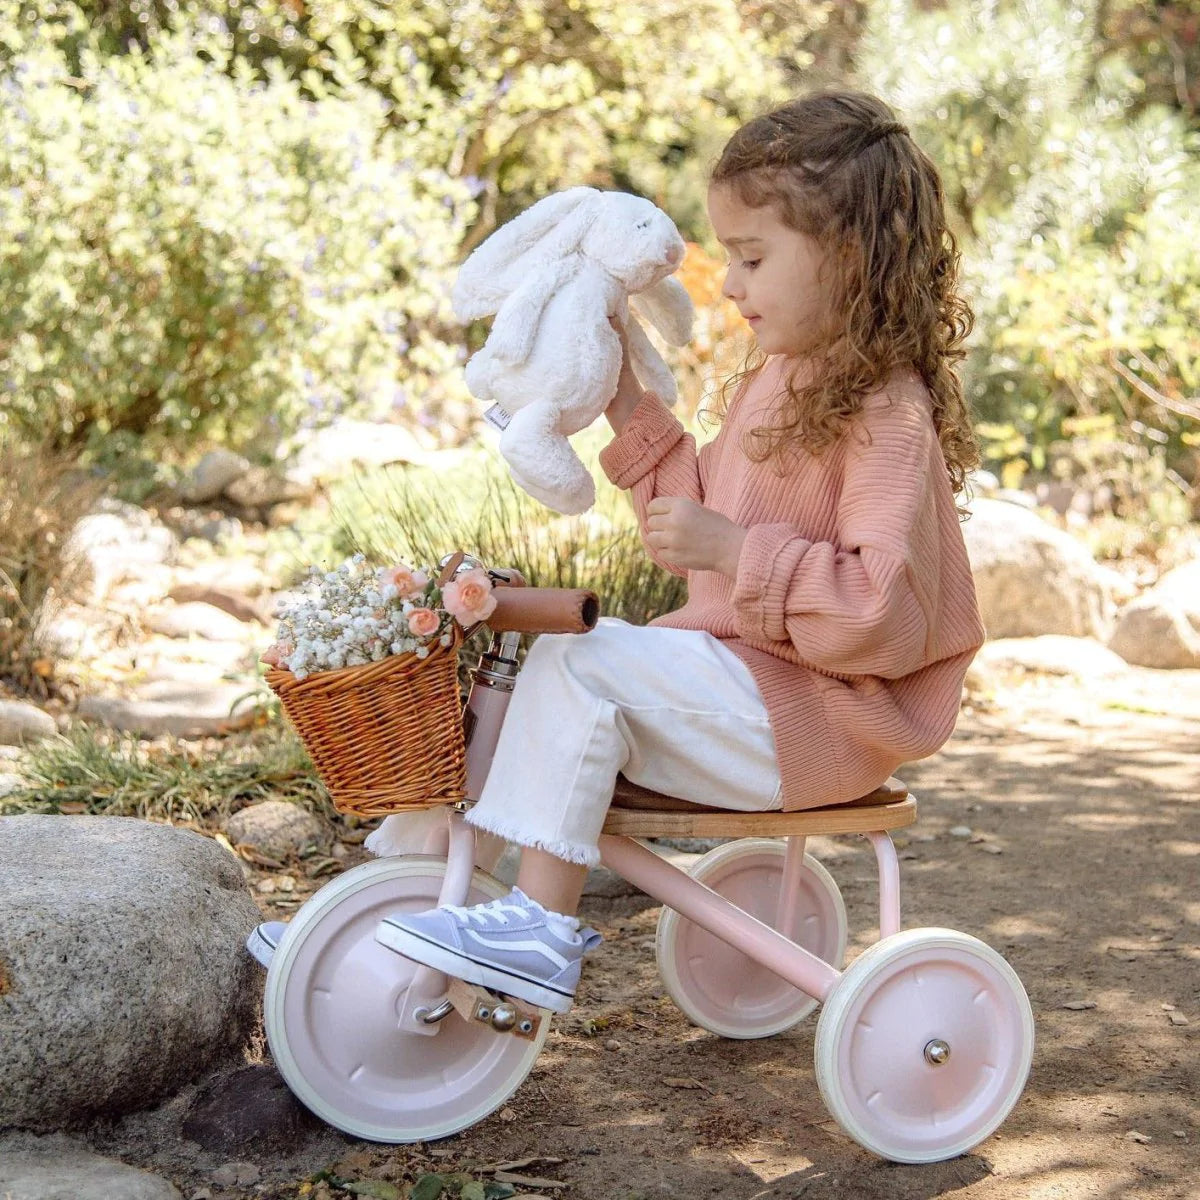 little girl holding teddy bear and riding banwood trike in pink